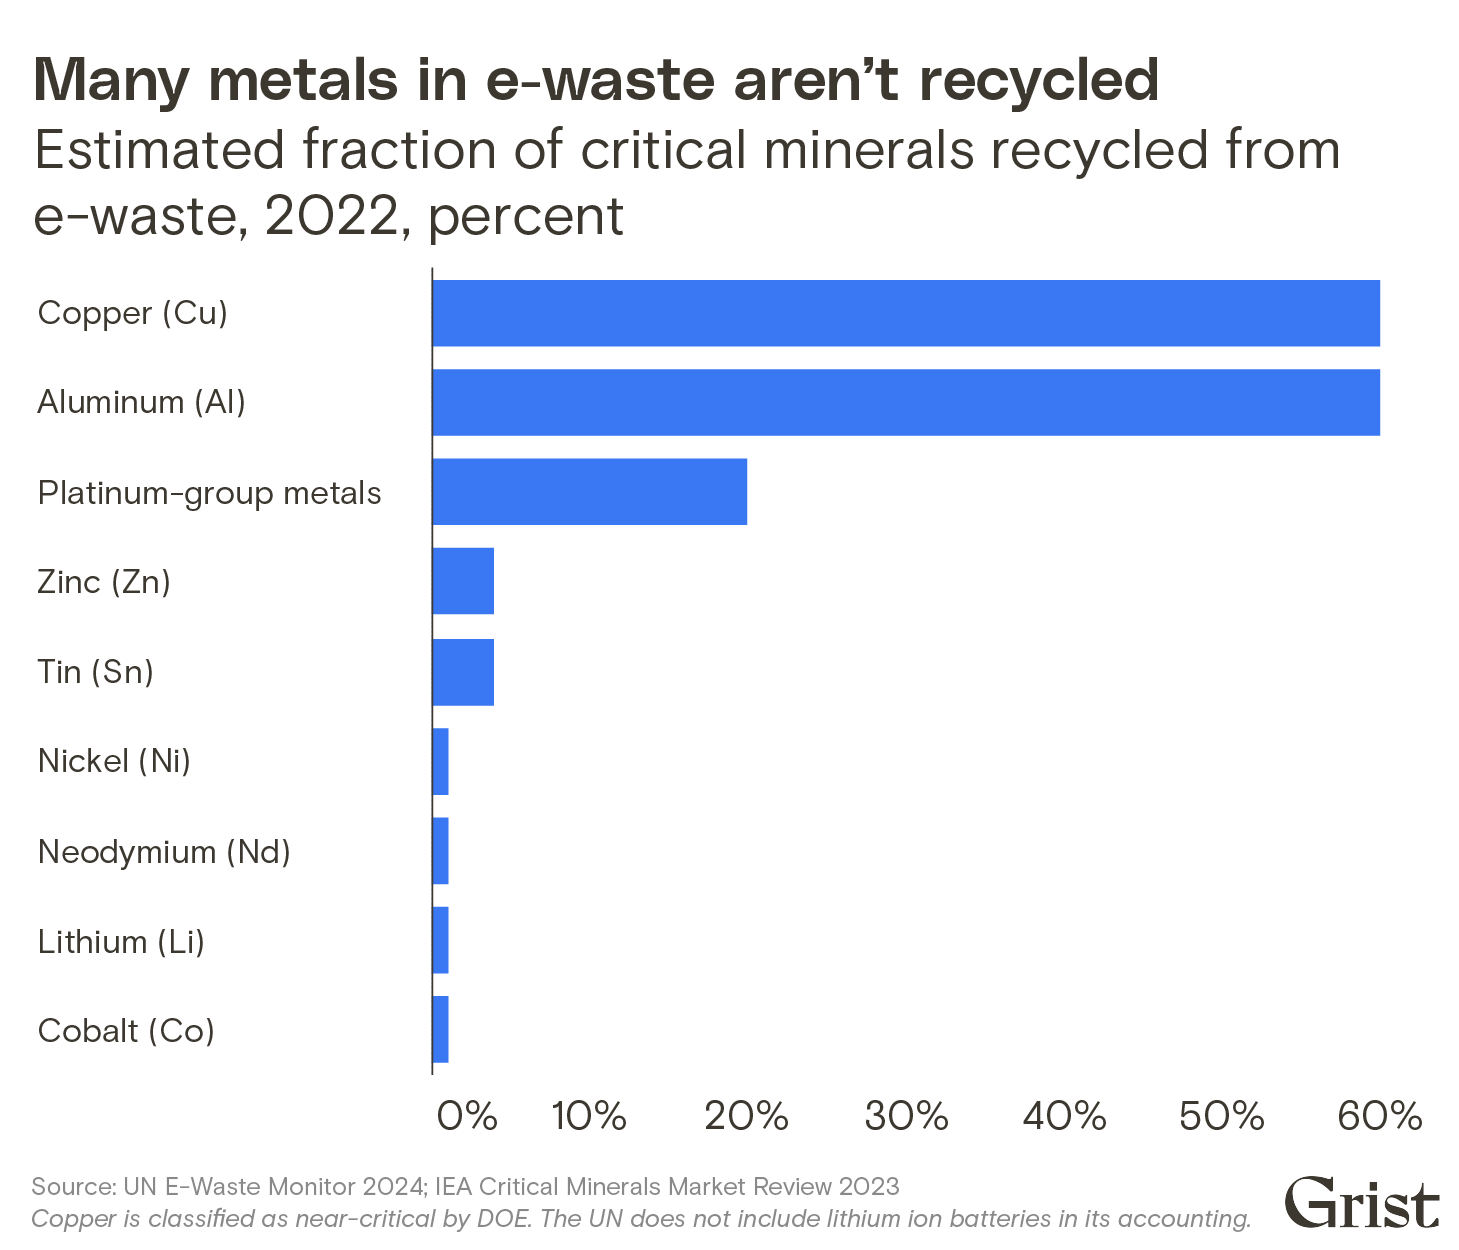 Bar chart showing the estimated proportion of critical minerals recovered from e-waste in 2022 (shown as a percentage). While metals like copper and aluminum have ratios close to 60%, metals like nickel and lithium have ratios below 1%.